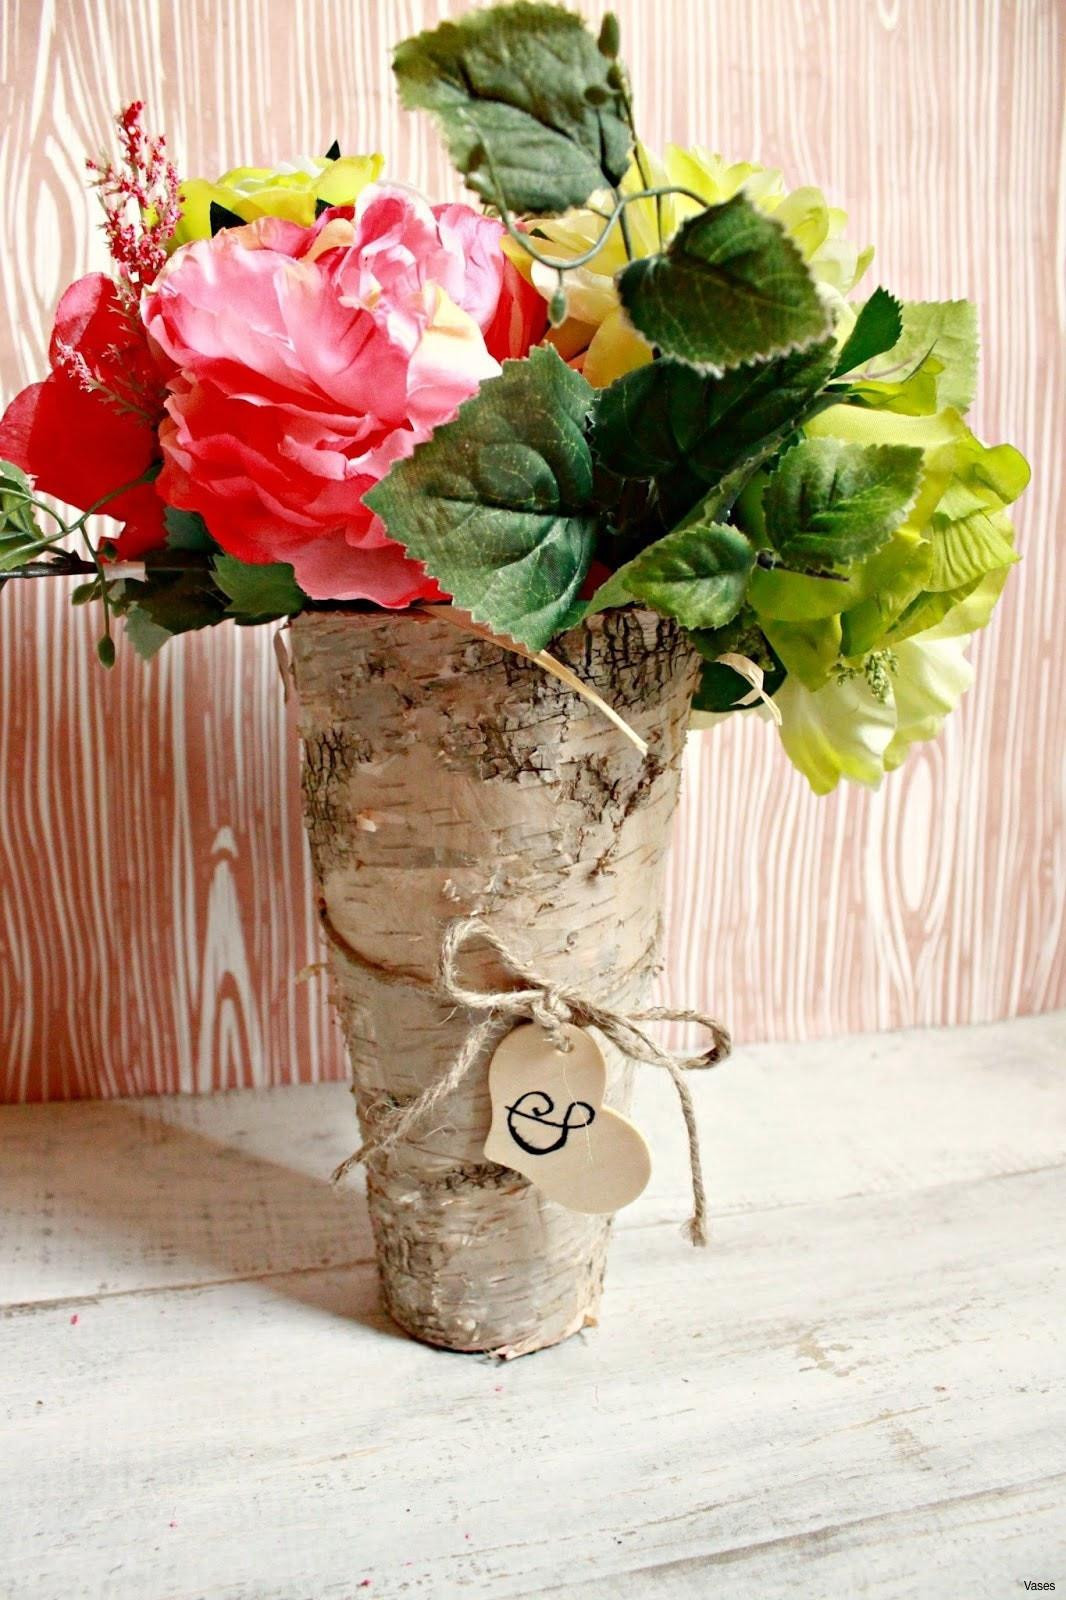 23 attractive Red orange Vase 2024 free download red orange vase of diy wedding ideas on a budget fresh flowers and decorations for with regard to diy wedding ideas on a budget fresh flowers and decorations for weddings h vases diy wood